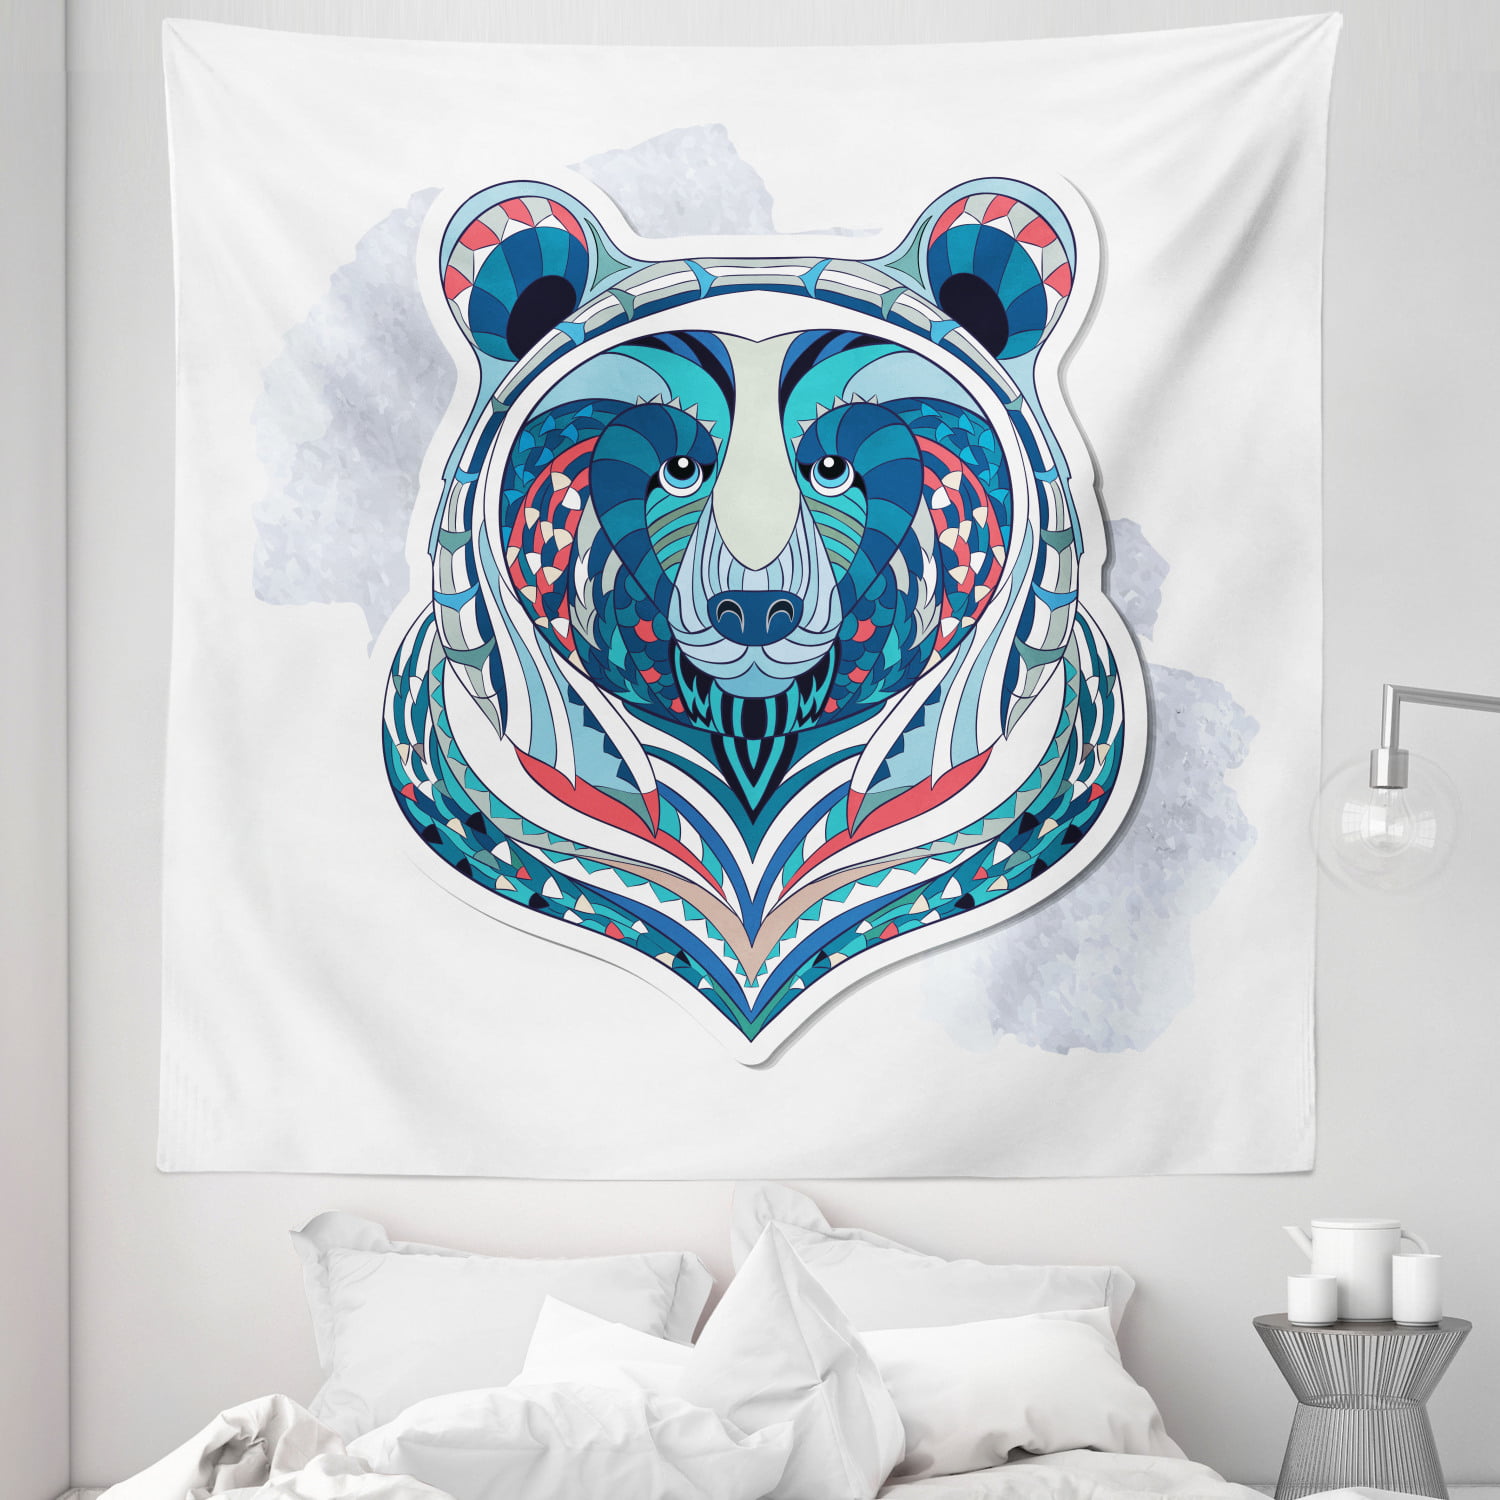 Totem Print Tapestry Wall Hanging Blanket Table Cloth Bedspread Throw Home Decor 